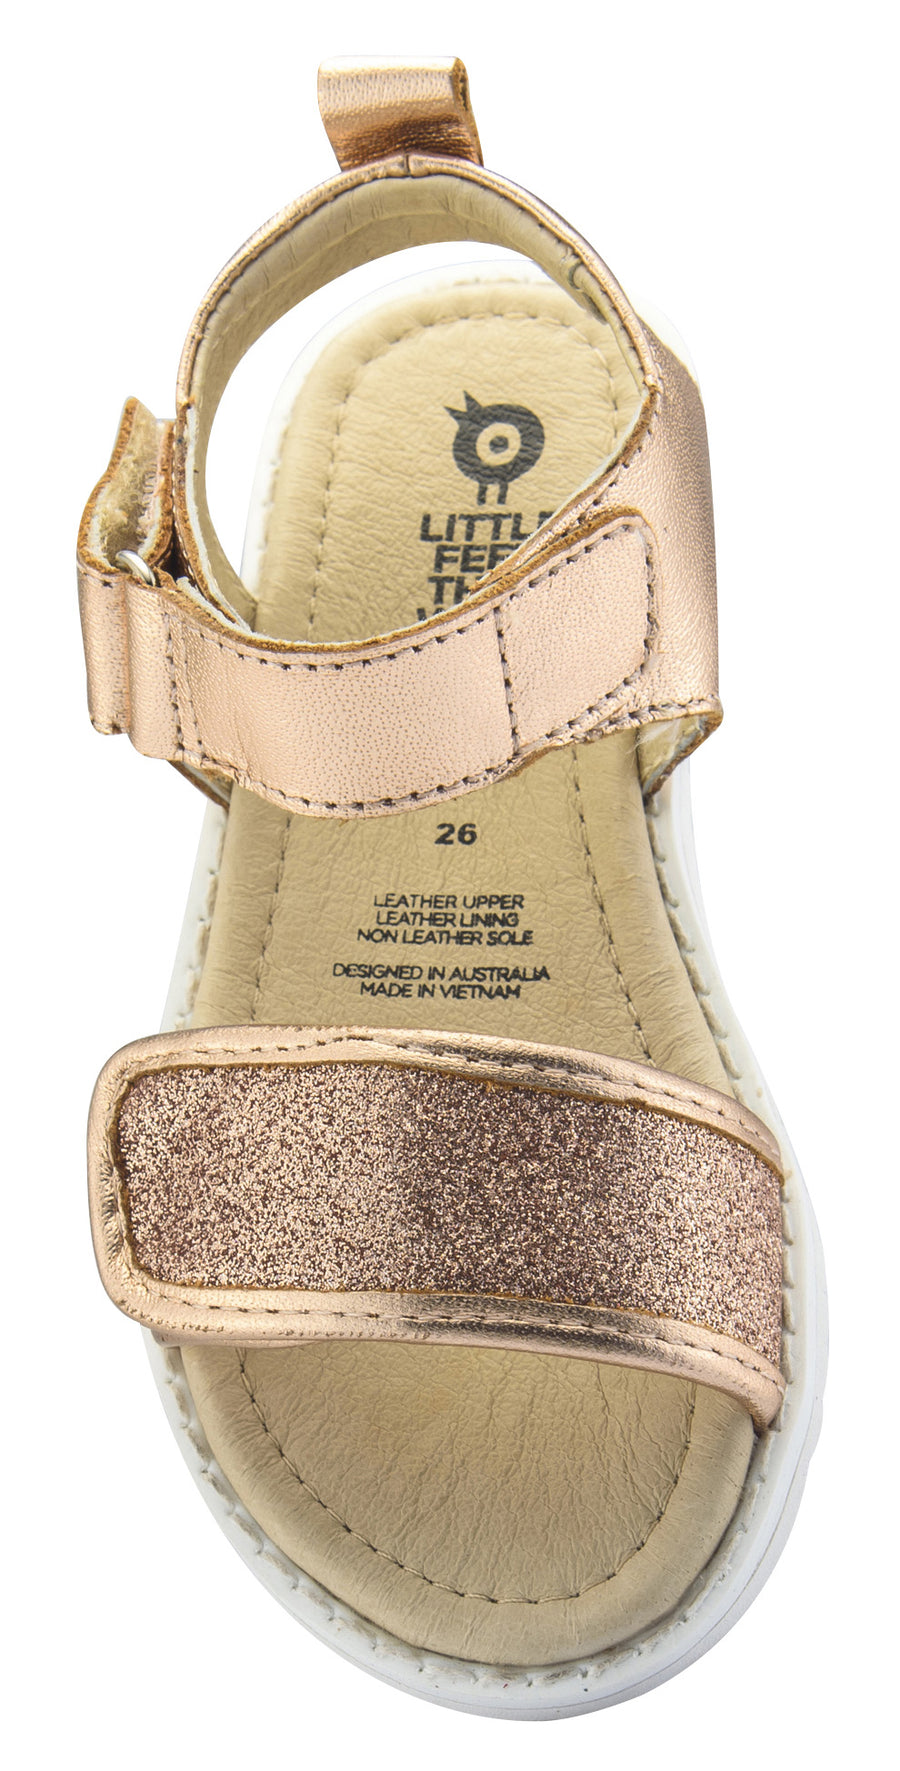 Old Soles Girl's Glam Tish Leather Sandals, Glam Copper